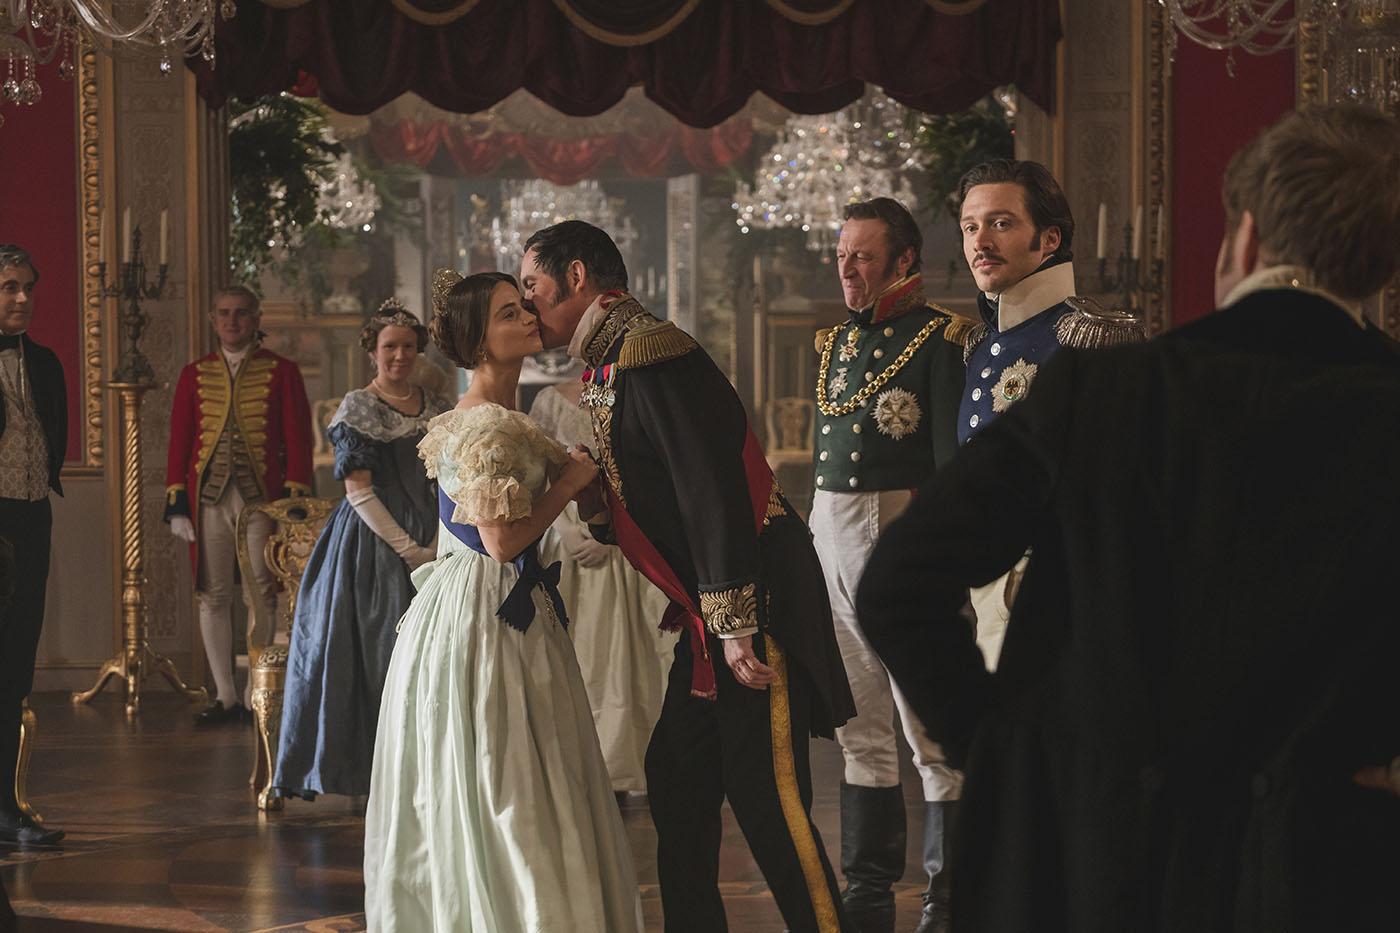 King Leopold, Ernest, and the Duke of Coburg greet Queen Victoria. Photo: Courtesy of ITV Studios